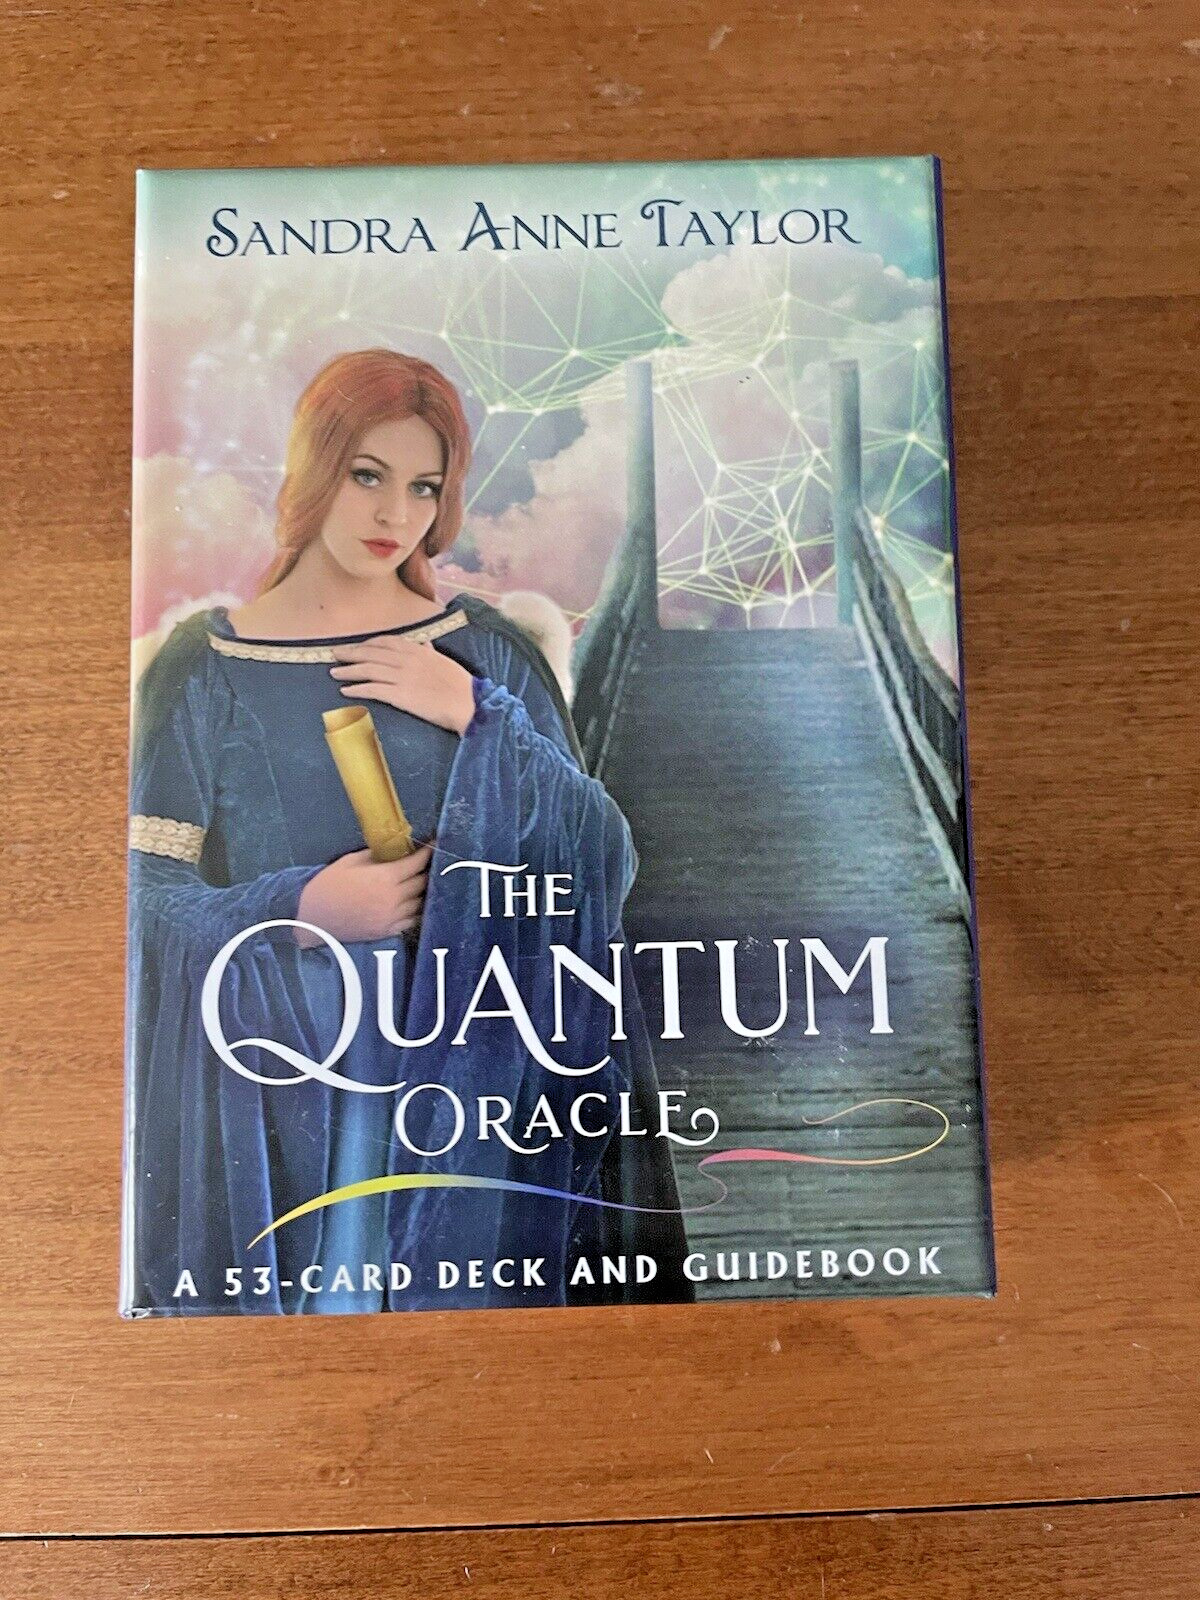 The Quantum Oracle 53-Card Deck with Guidebook - Sandra Anne Taylor